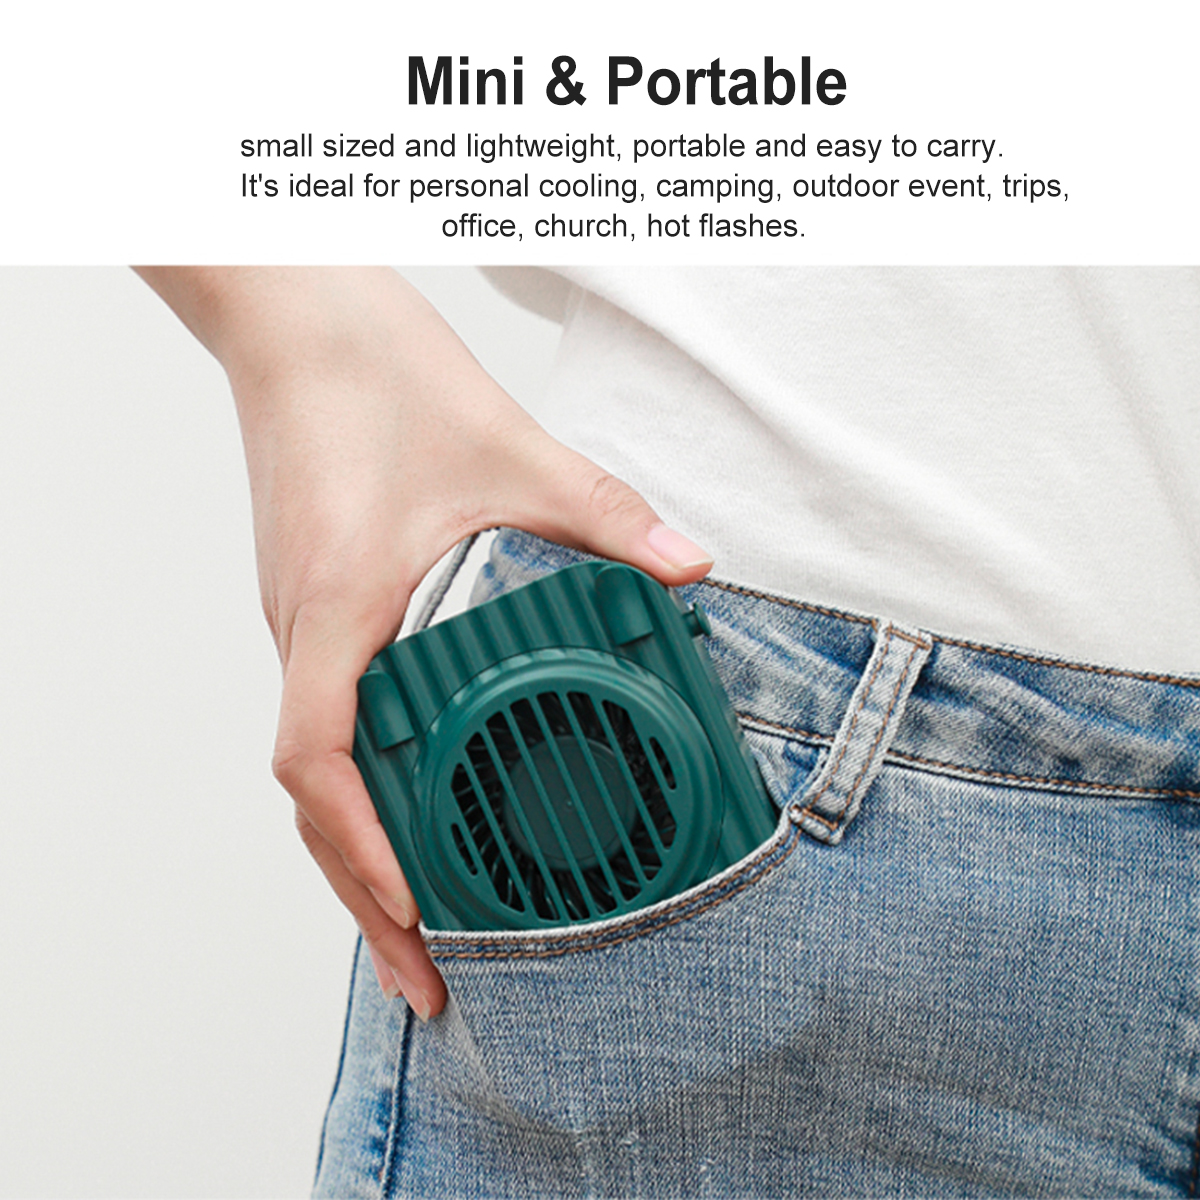 Hanging-Neck-Fan-Portable-Mini-3-Gears-Adjustable-USB-Air-Condition-Fan-Outdoor-Camping-Travel-1836589-6